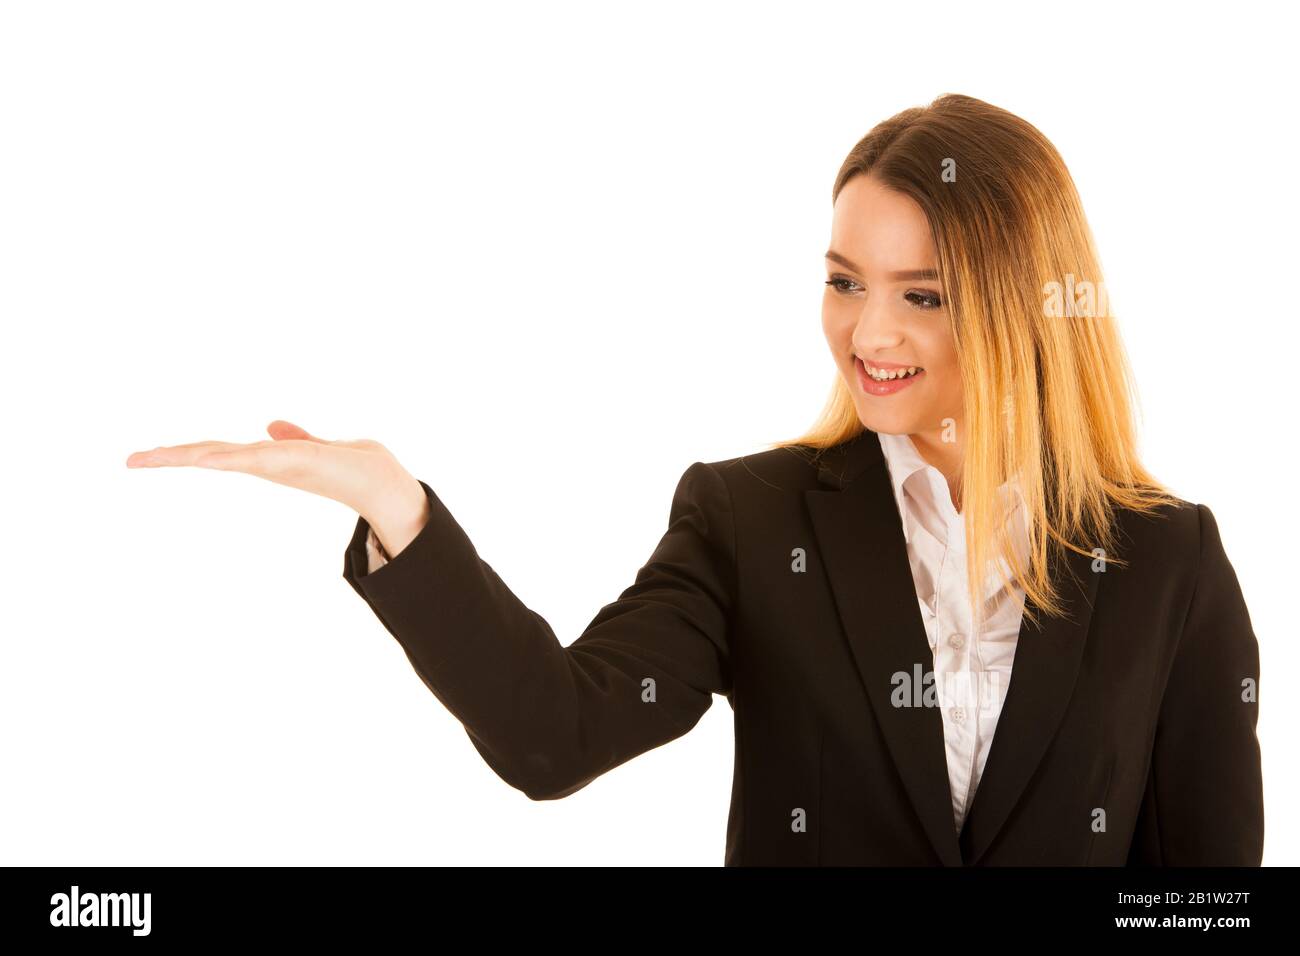 business woman holds hand over copy space for marketing a product Stock Photo